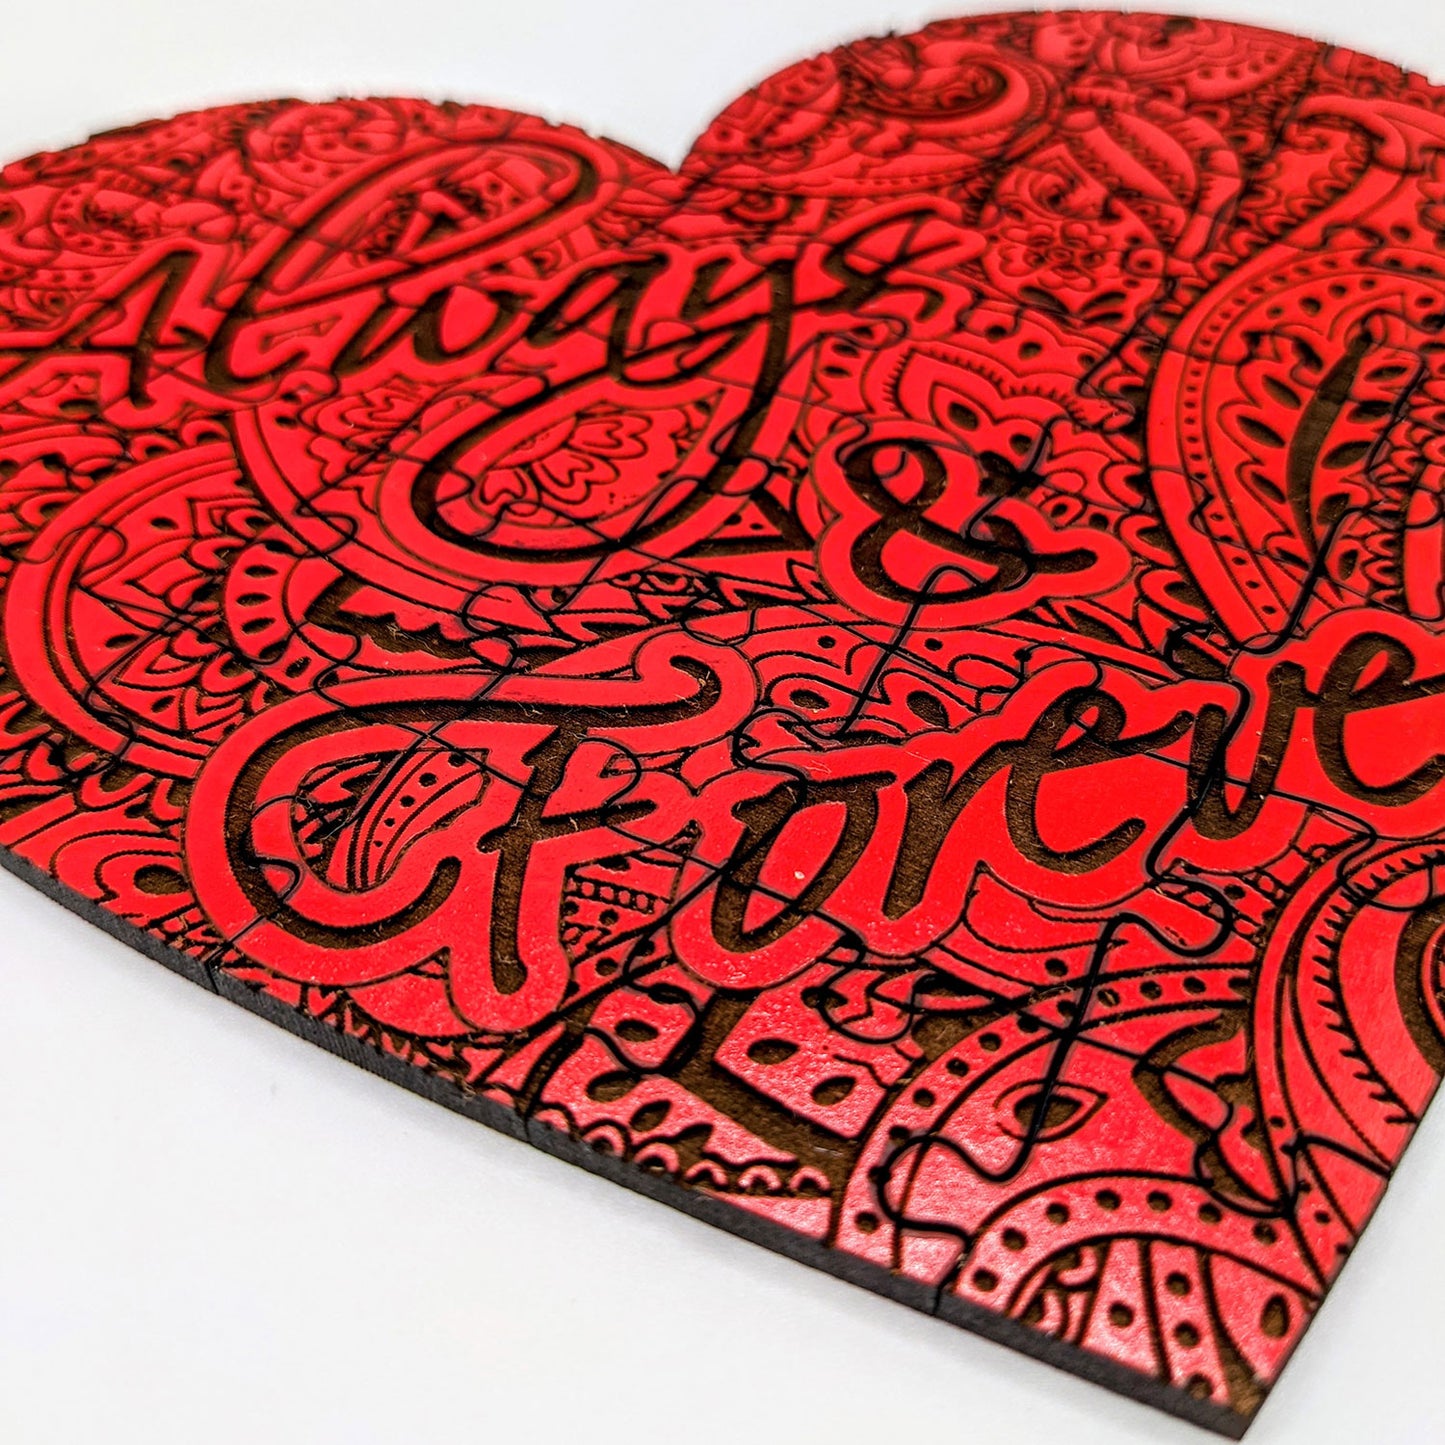 Always & Forever Heart Puzzle